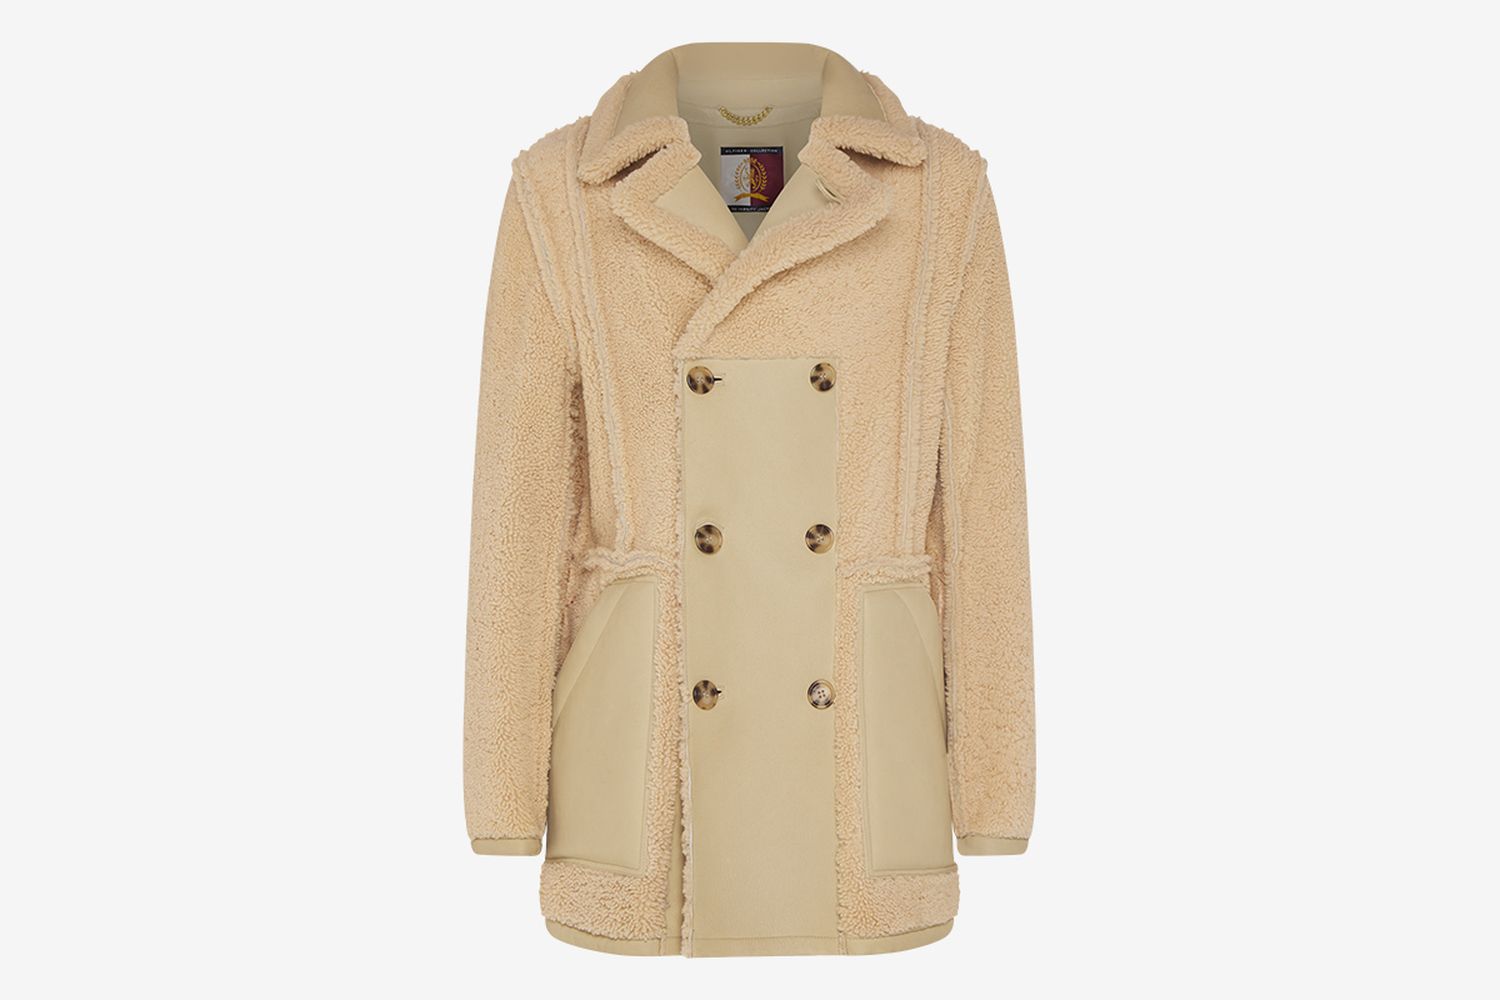 Hilfiger Collection Reversible Shearling Coat